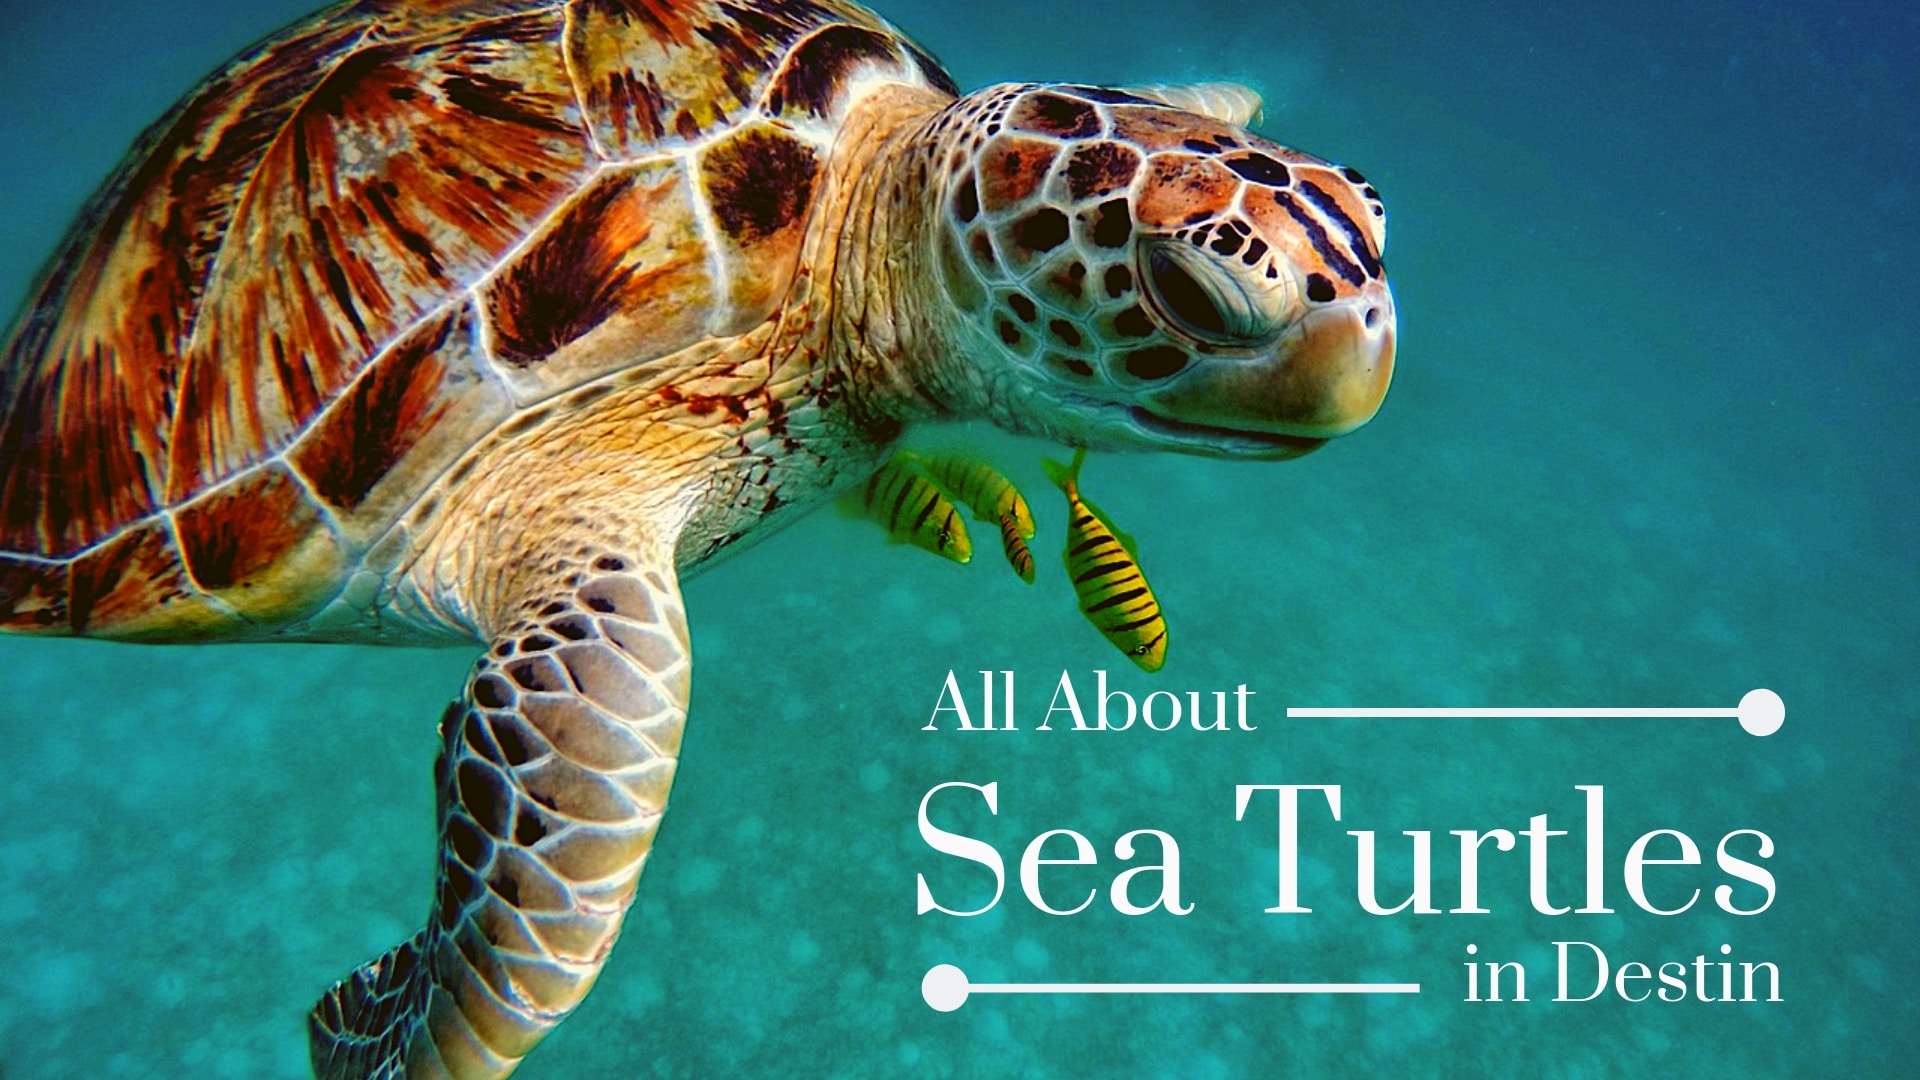 All About Sea Turtles in Destin - Forever Vacation Rentals